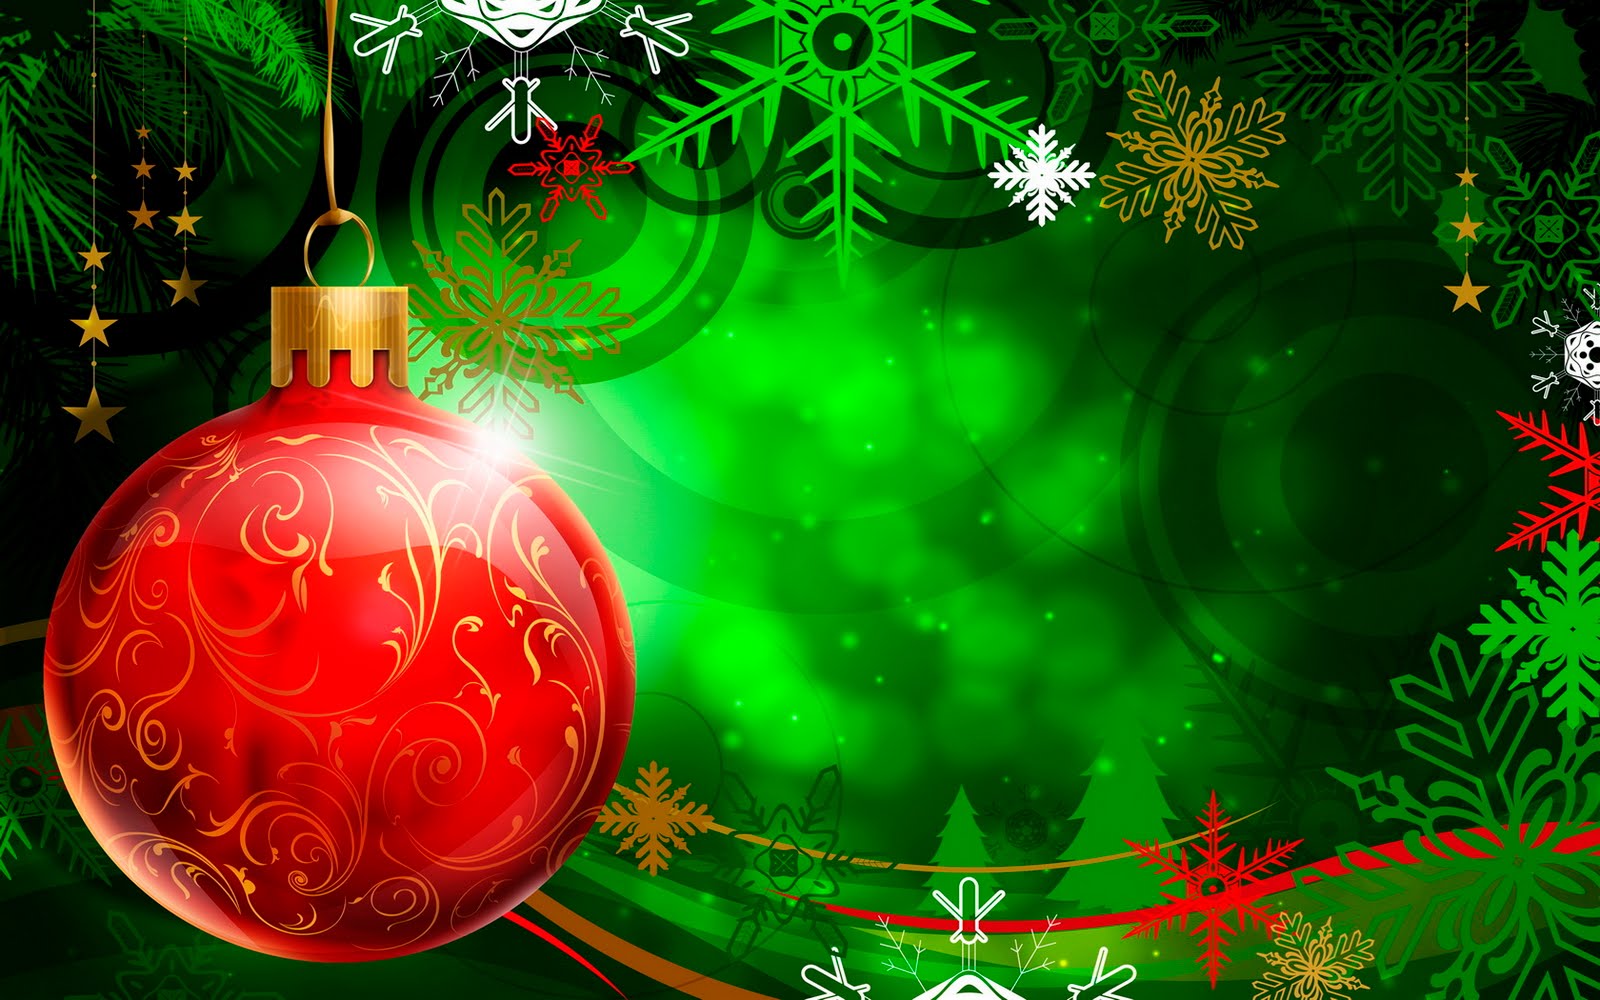 christian christmas clipart free download - photo #44